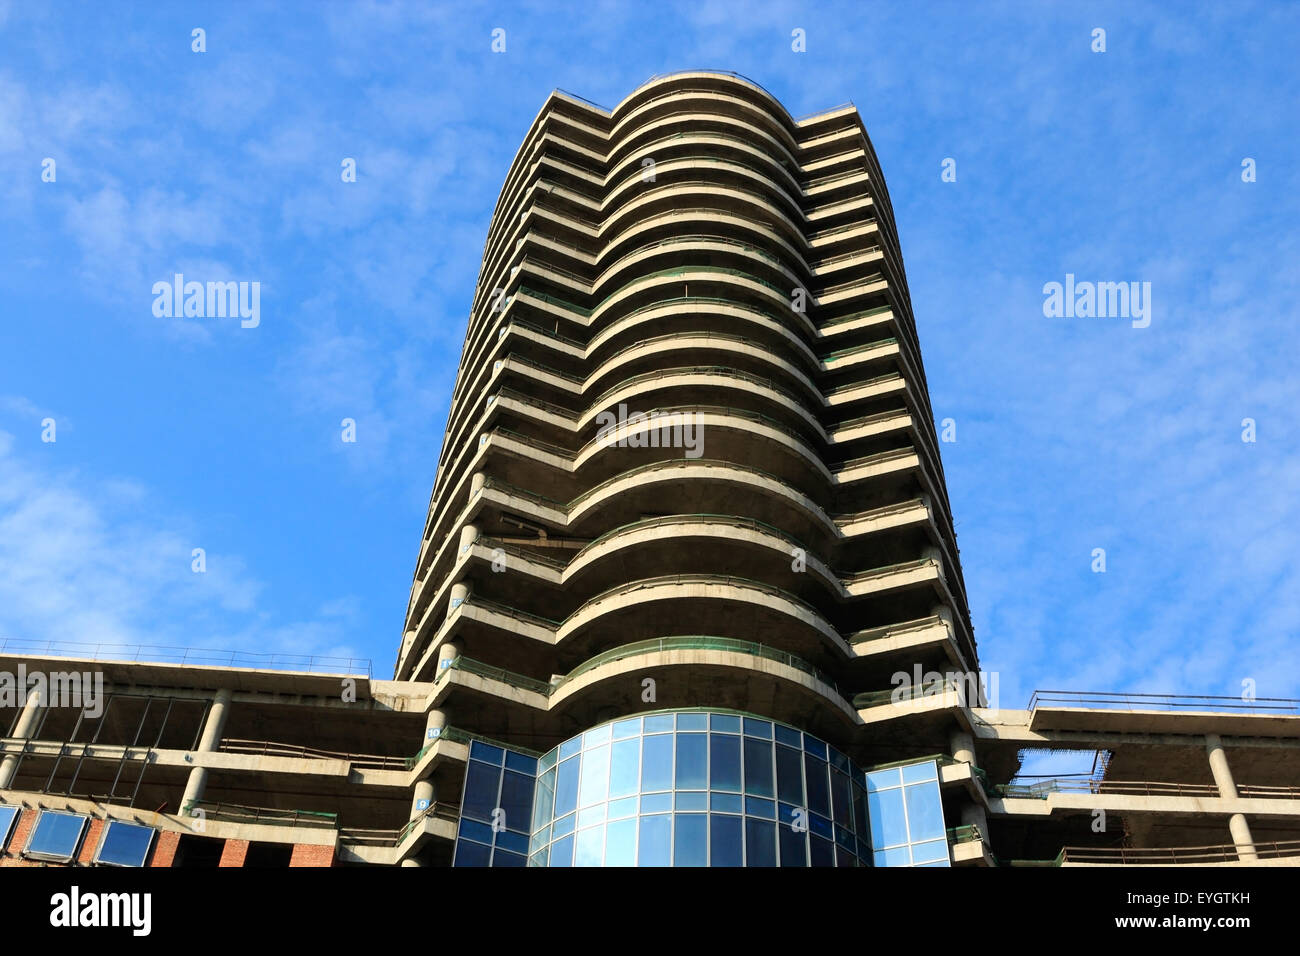 A new uncomplete multistorey building against blue sky. Stock Photo